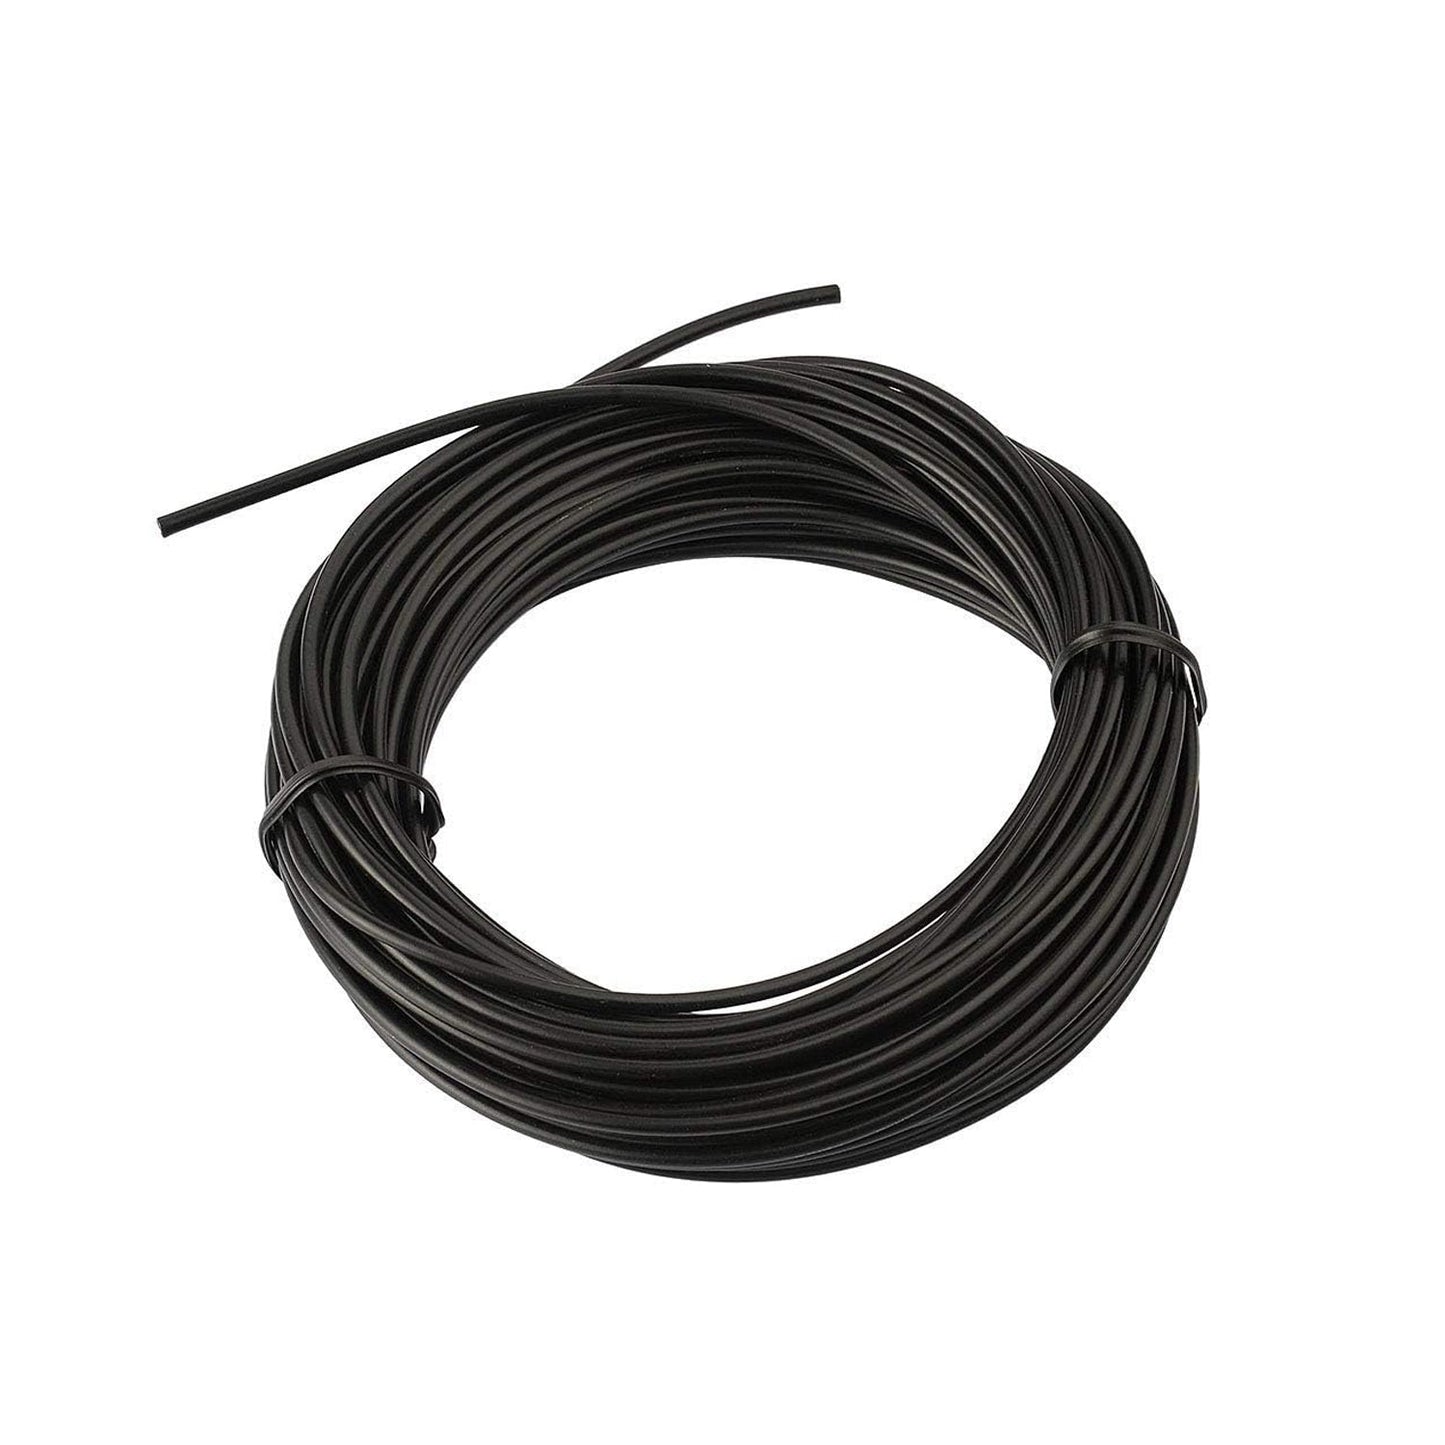 Cloth Drying Wire High Quality Agriculture & Gardening Use Wire 10Mtr